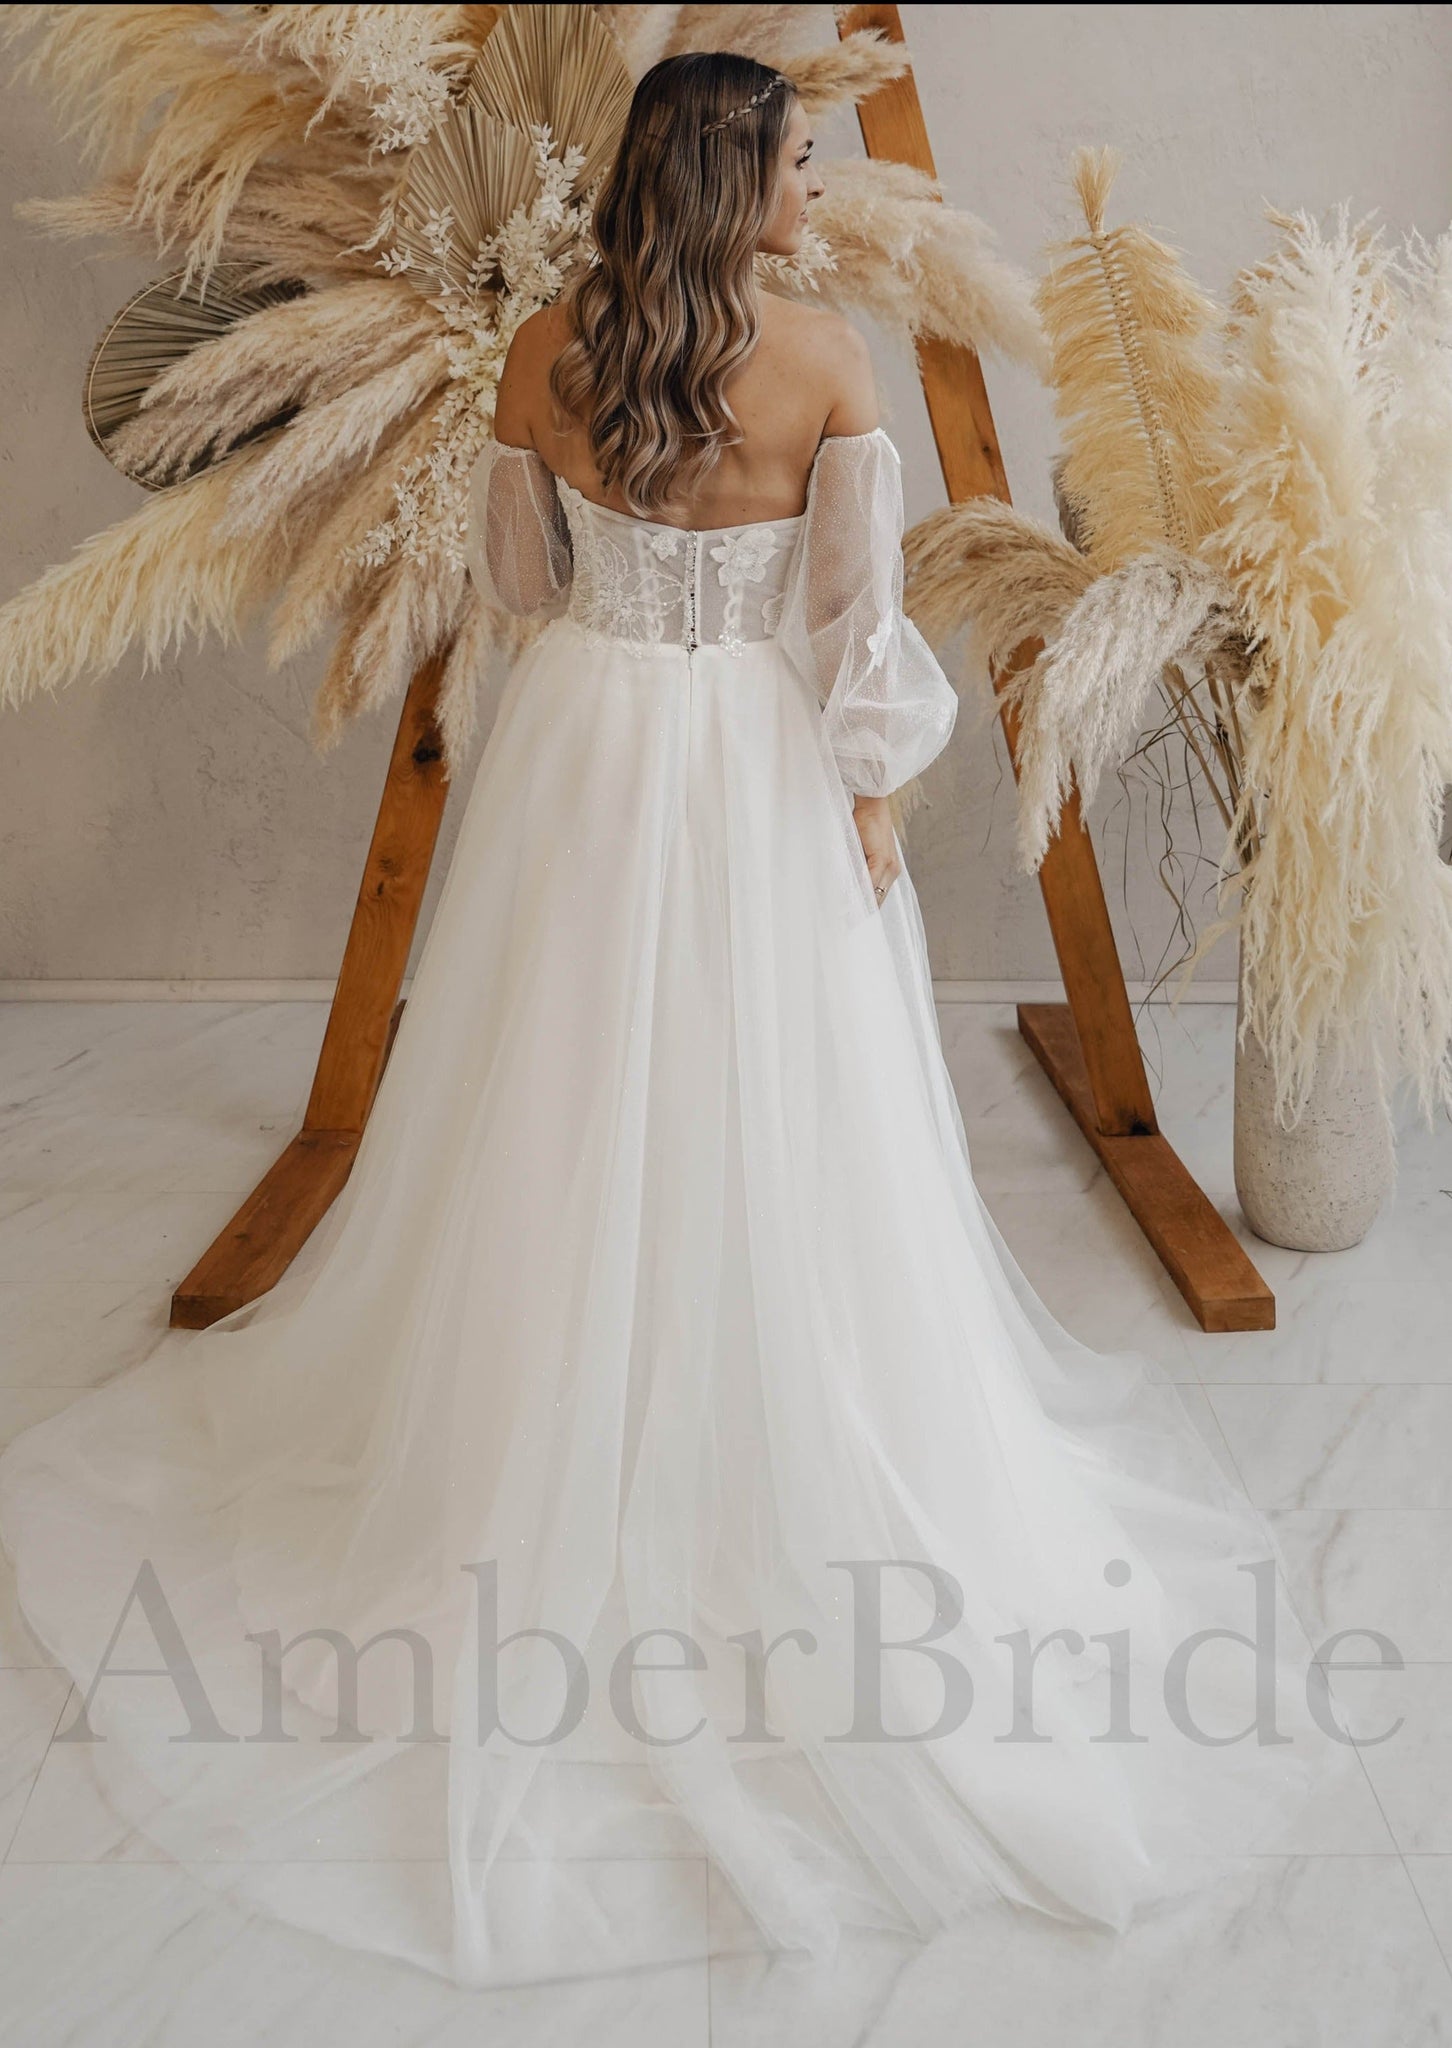 Rustic A-Line Tulle Wedding Dress with Bishop Sleeves, Illusion Back